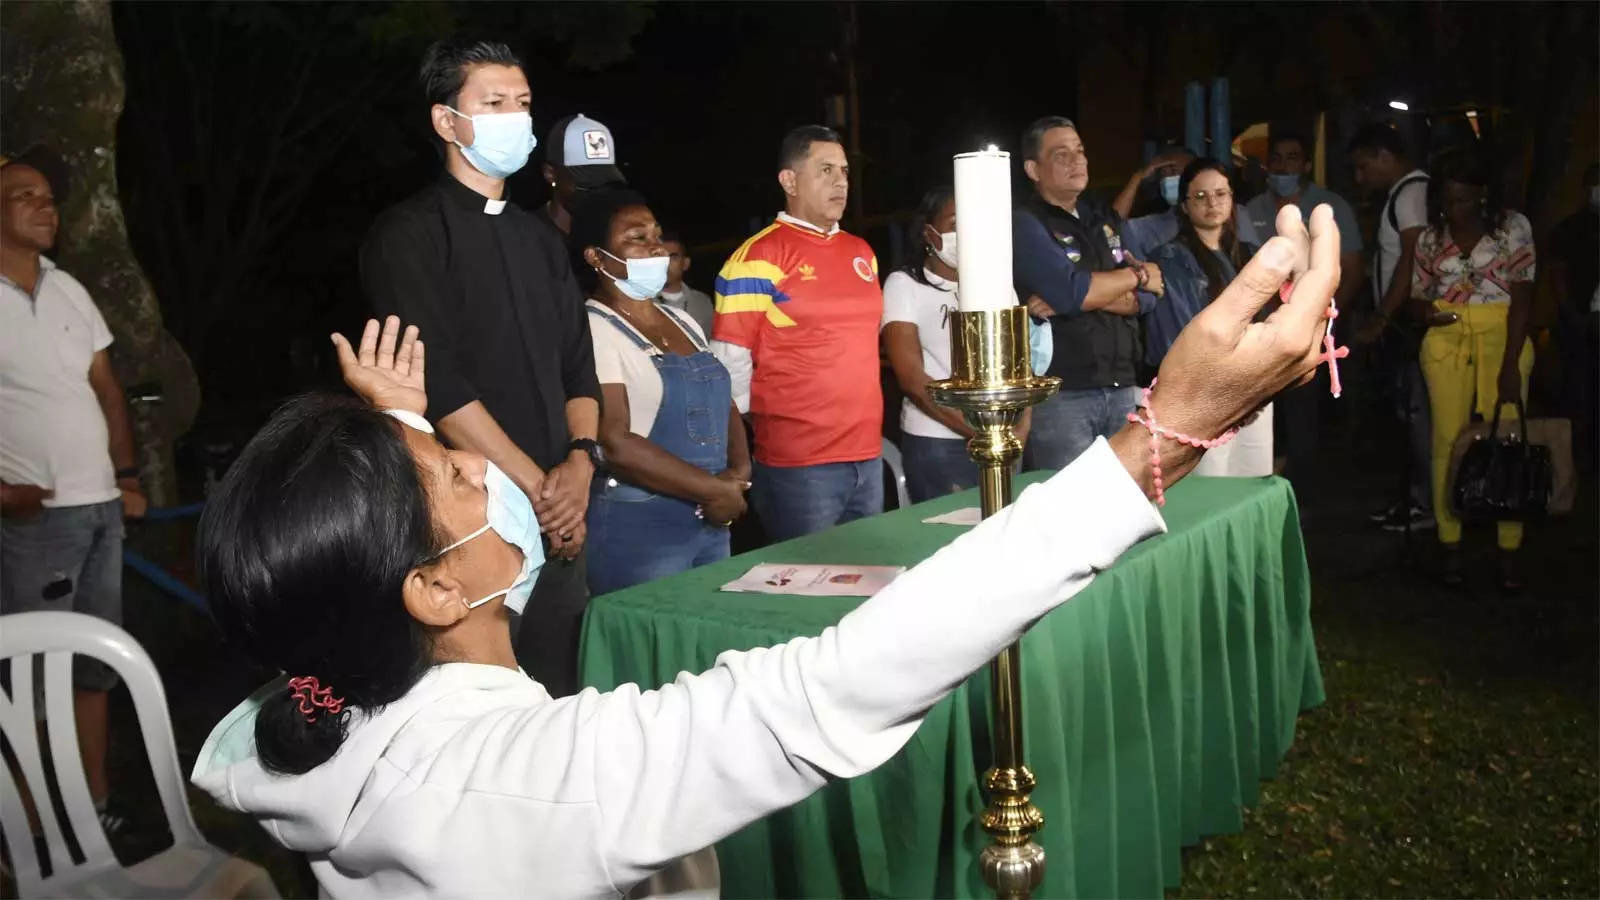 Relatives and friends of former Colombia soccer midfielder Freddy Rincon, who was seriously injured in a traffic accident, pray for him during candlelight vigil near the hospital